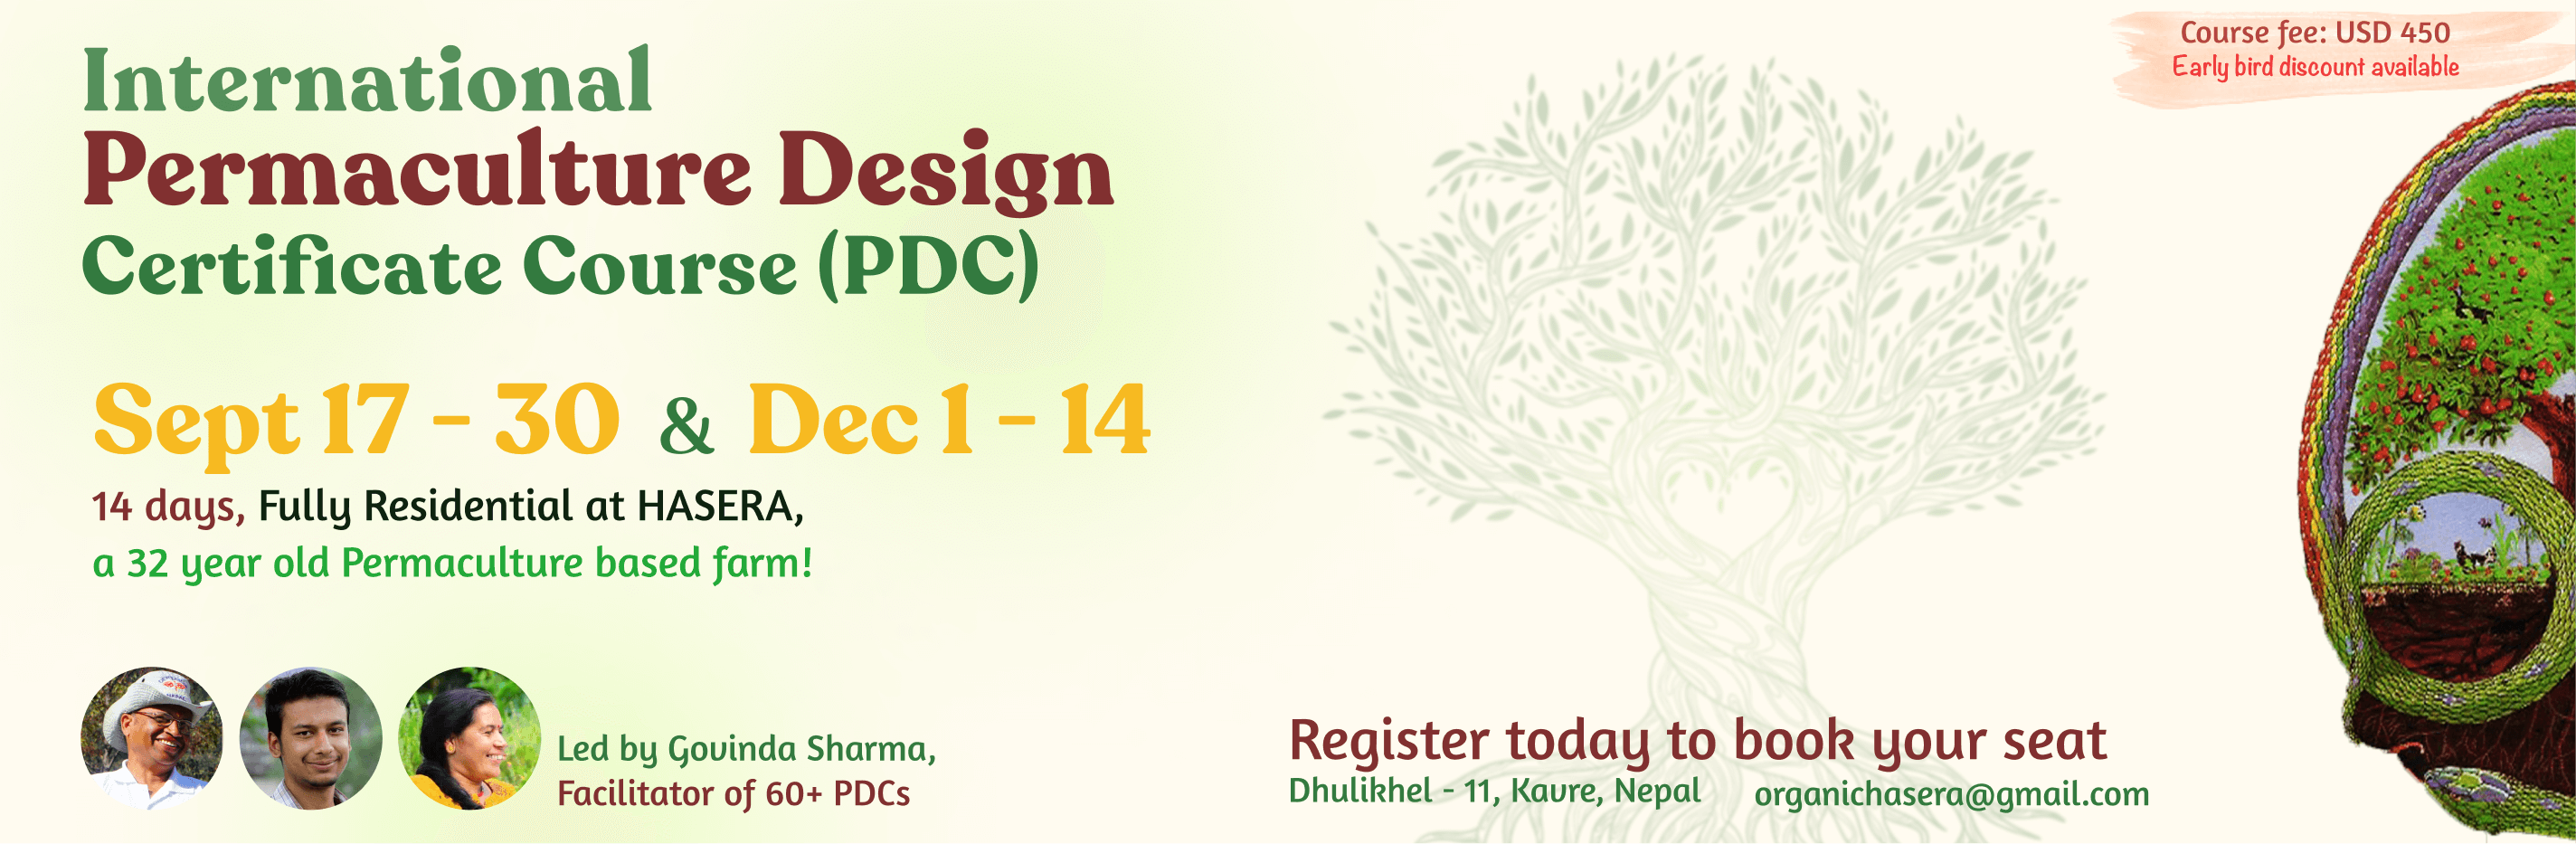 Our next Int'l Permaculture Design Course (PDC) is planned for Sept 17 - 30 & Dec 1 - 14, 2024